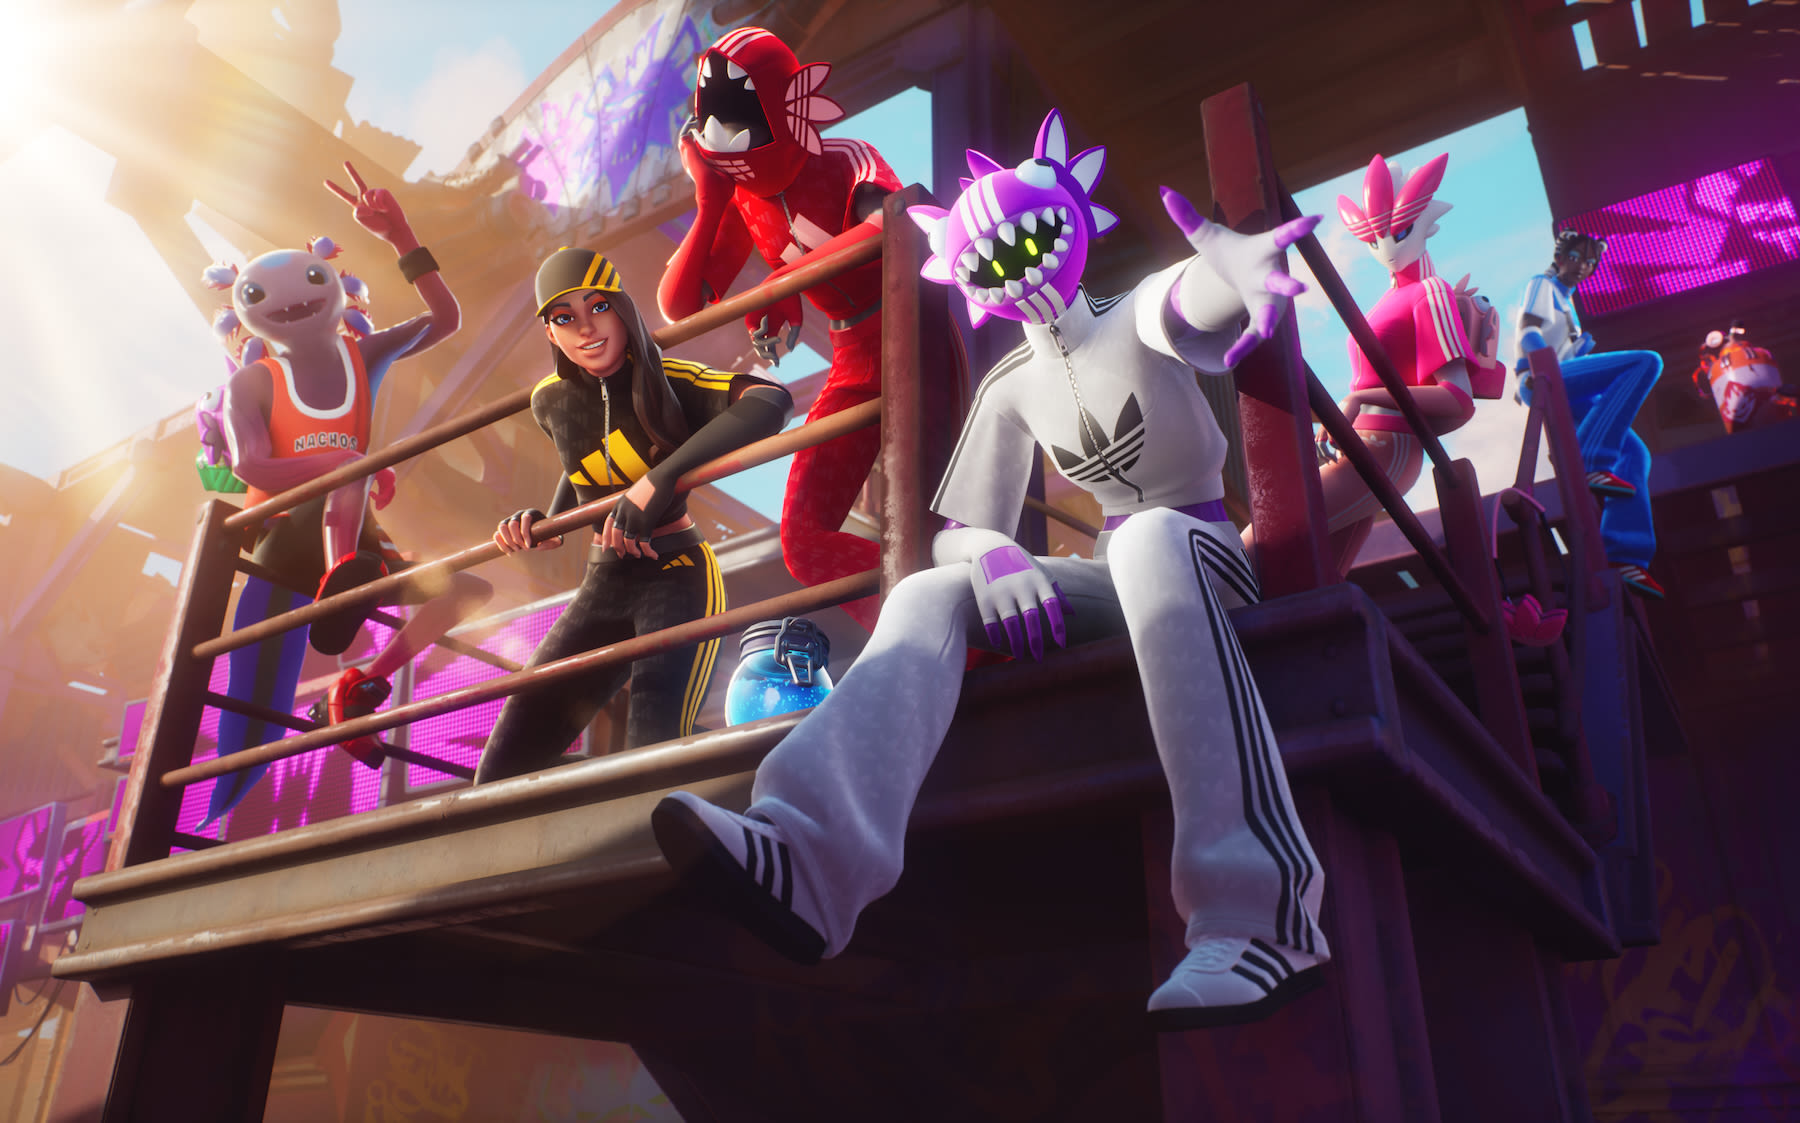 ‘Fortnite’ and Adidas Launch a New Partnership With Customizable Sneakers and Apparel In-Game